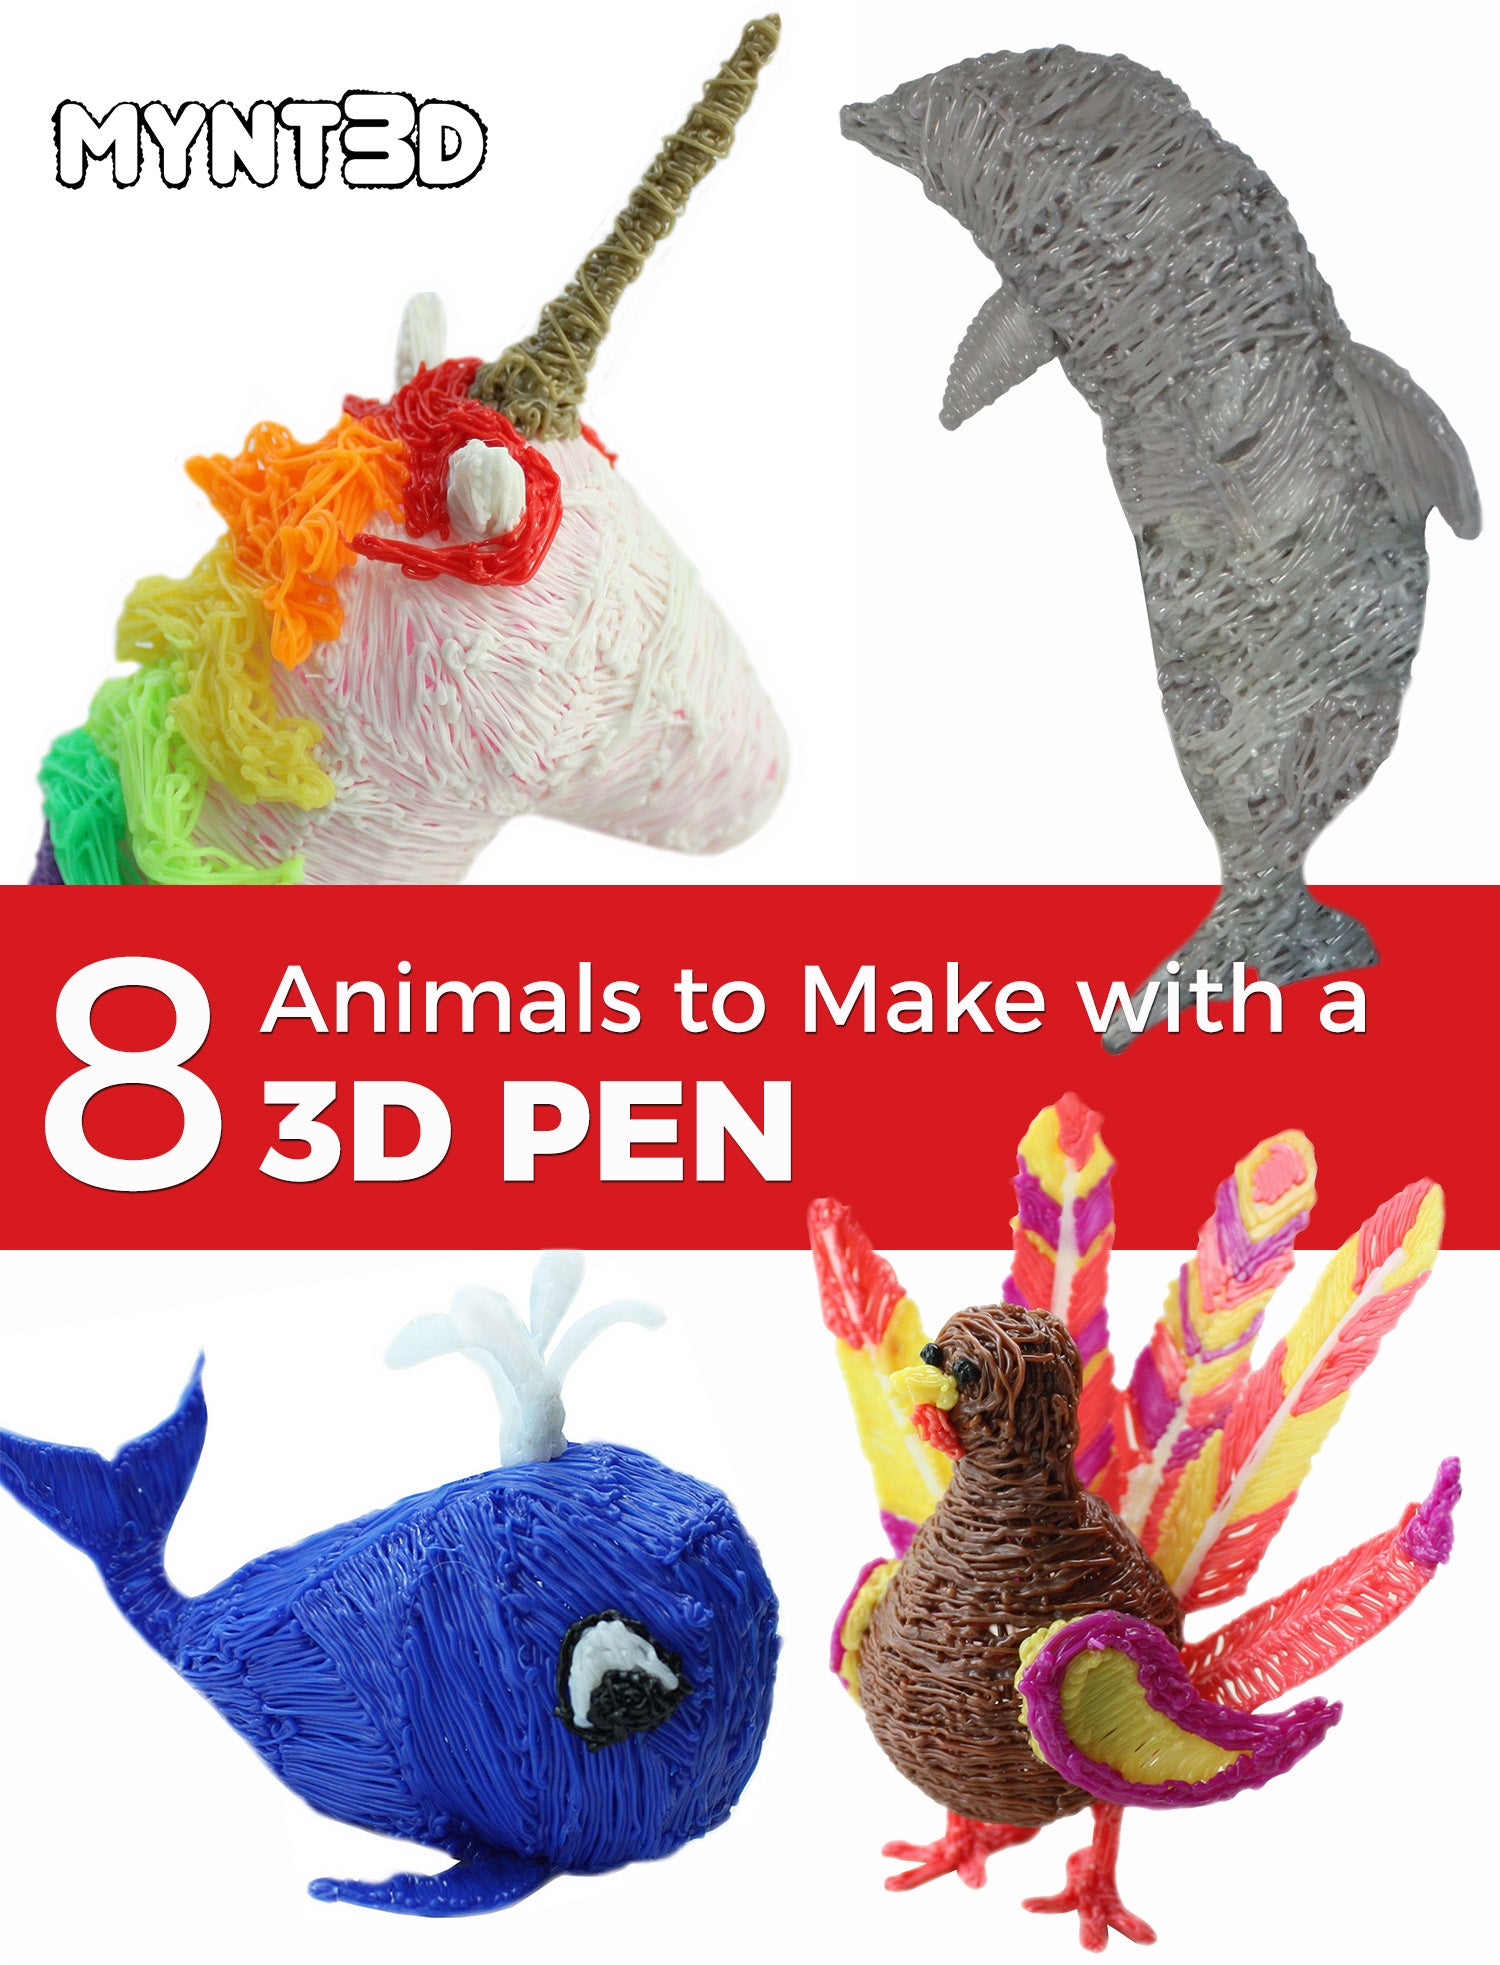 Magic 3D Pen, Bring your creations to life